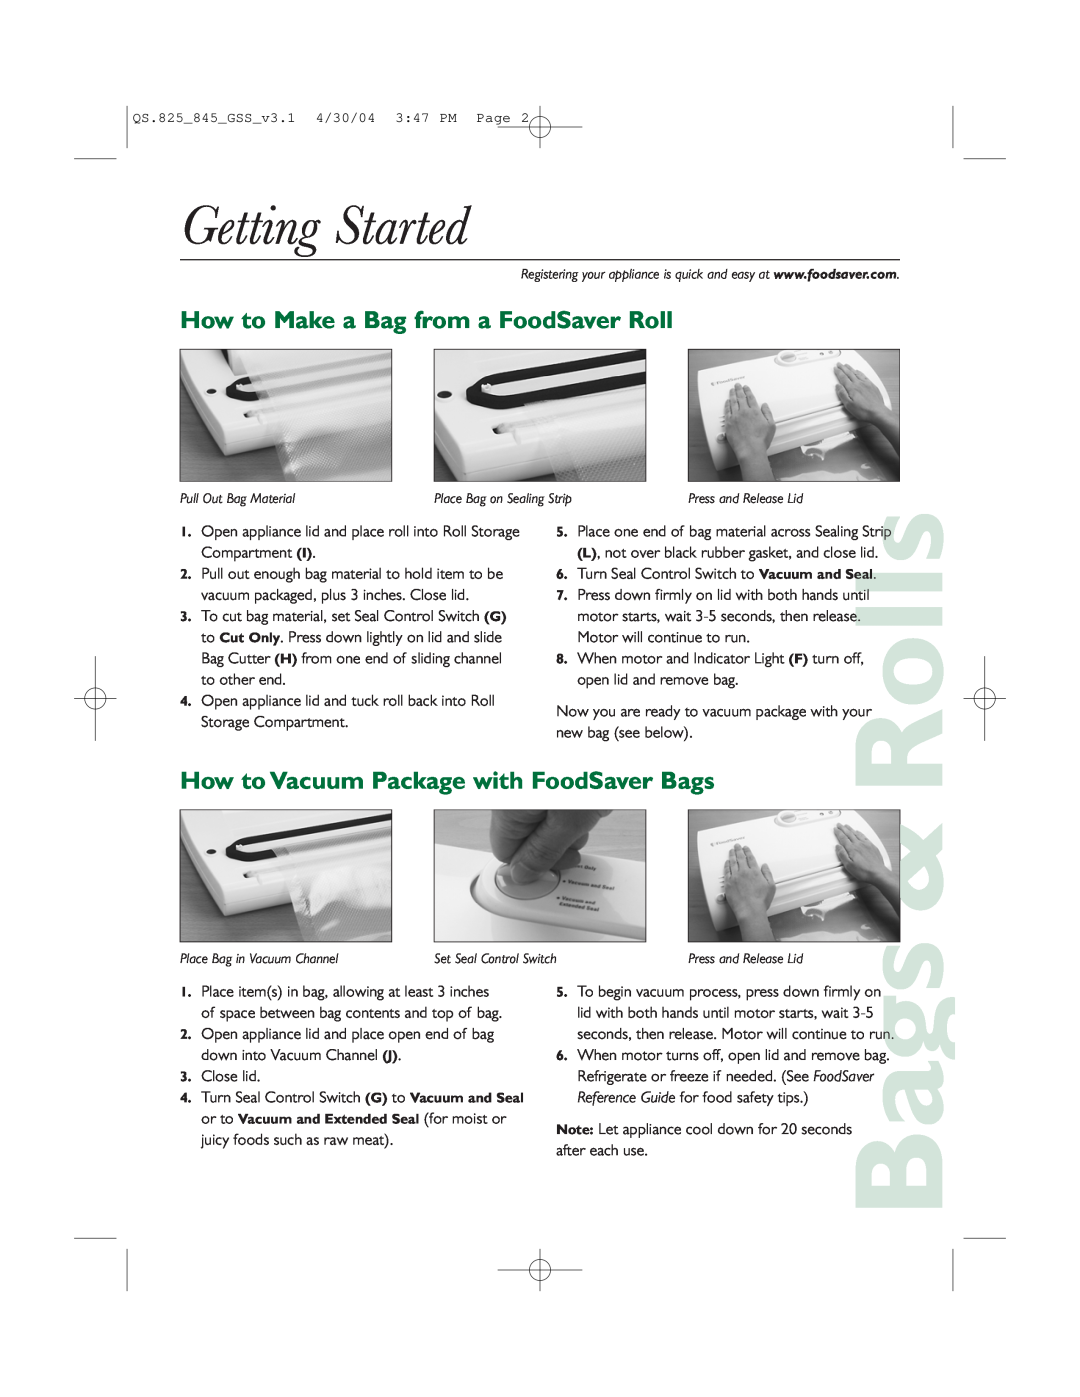 FoodSaver V845, v825 quick start Getting Started, How to Make a Bag from a FoodSaver Roll, Bags, Rolls 